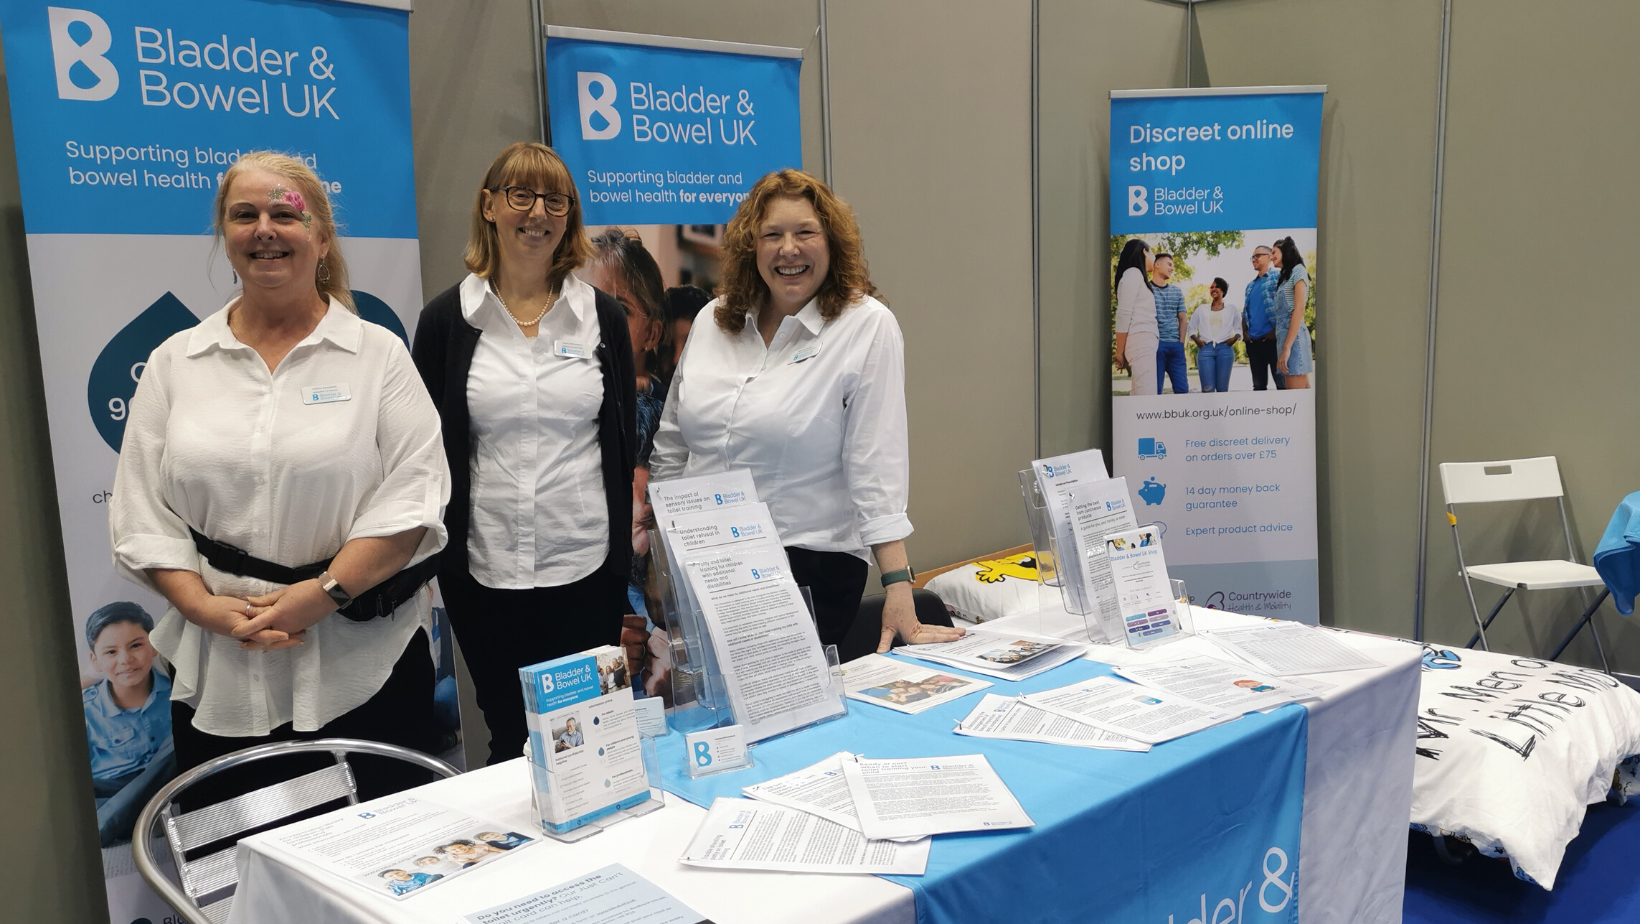 An image of 3 bladder and bowel nurses and specialists at the Kidz to Adultz North event at their stand